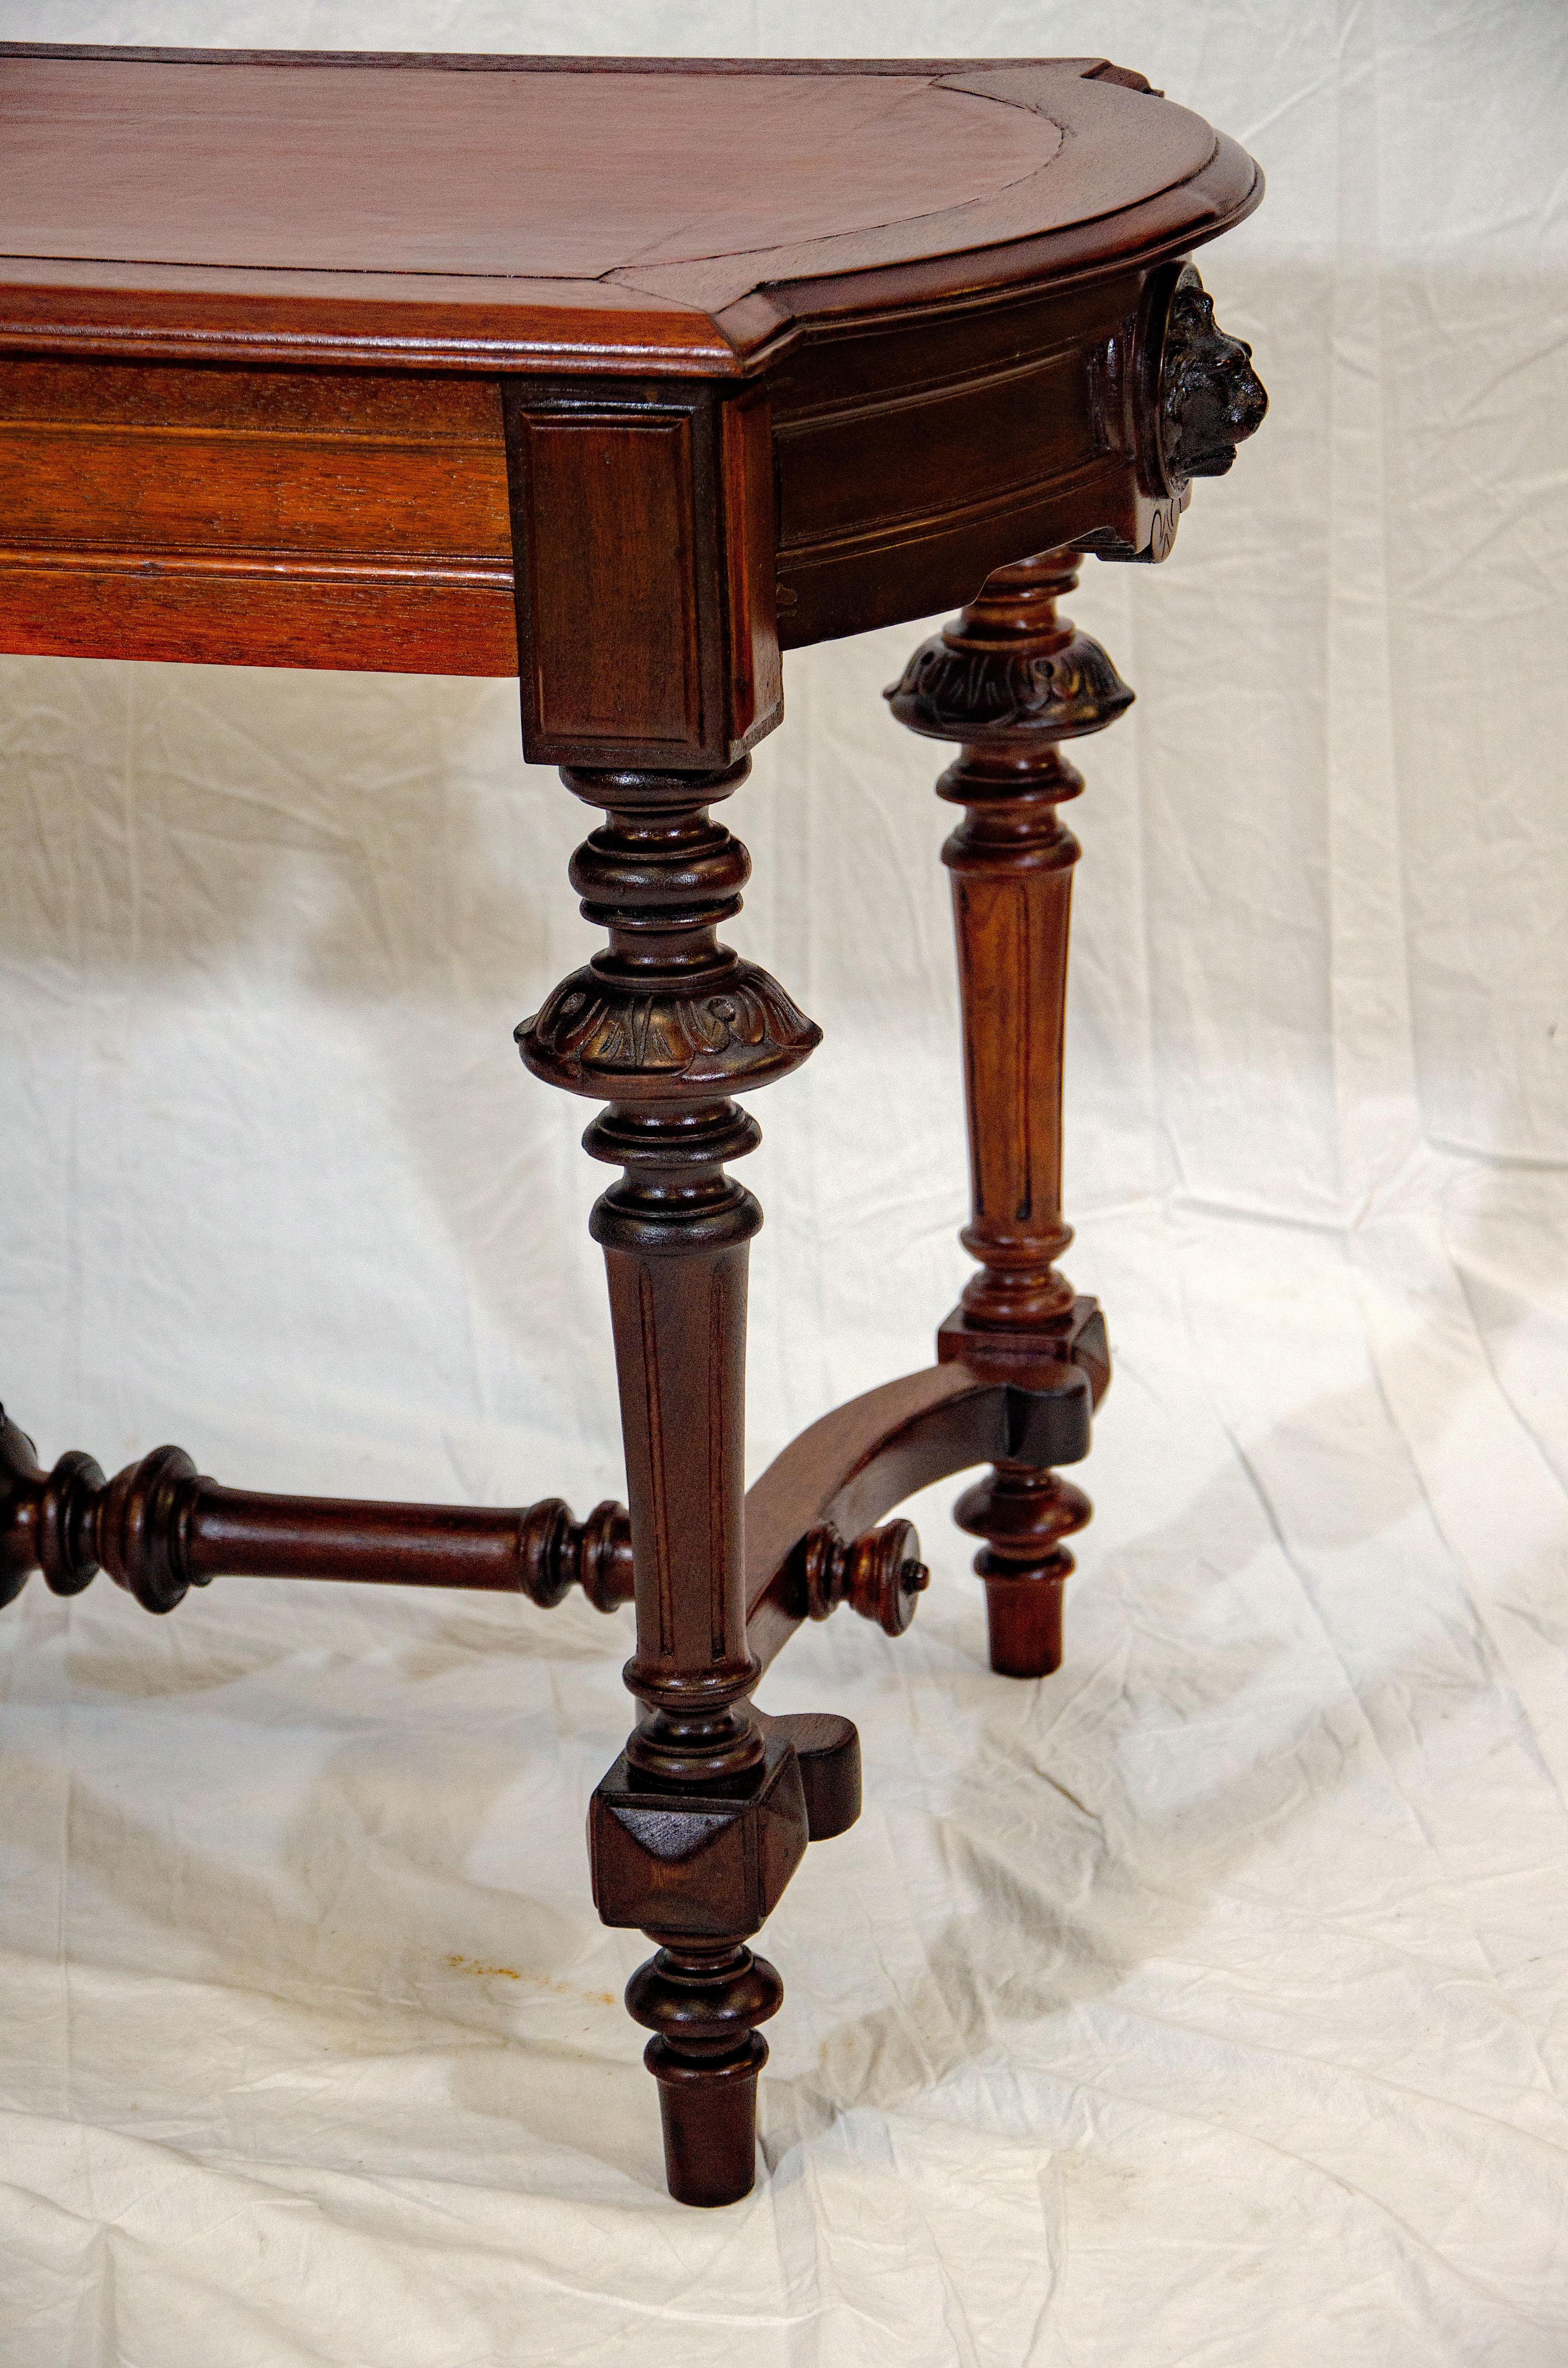 Multi-purpose victorian walnut table with leather inset. The top surface has straight sides and rounded ends. There are four turned and carved legs and carved stretchers. A lion's head inset accents the aprons at the curved ends. There is one drawer